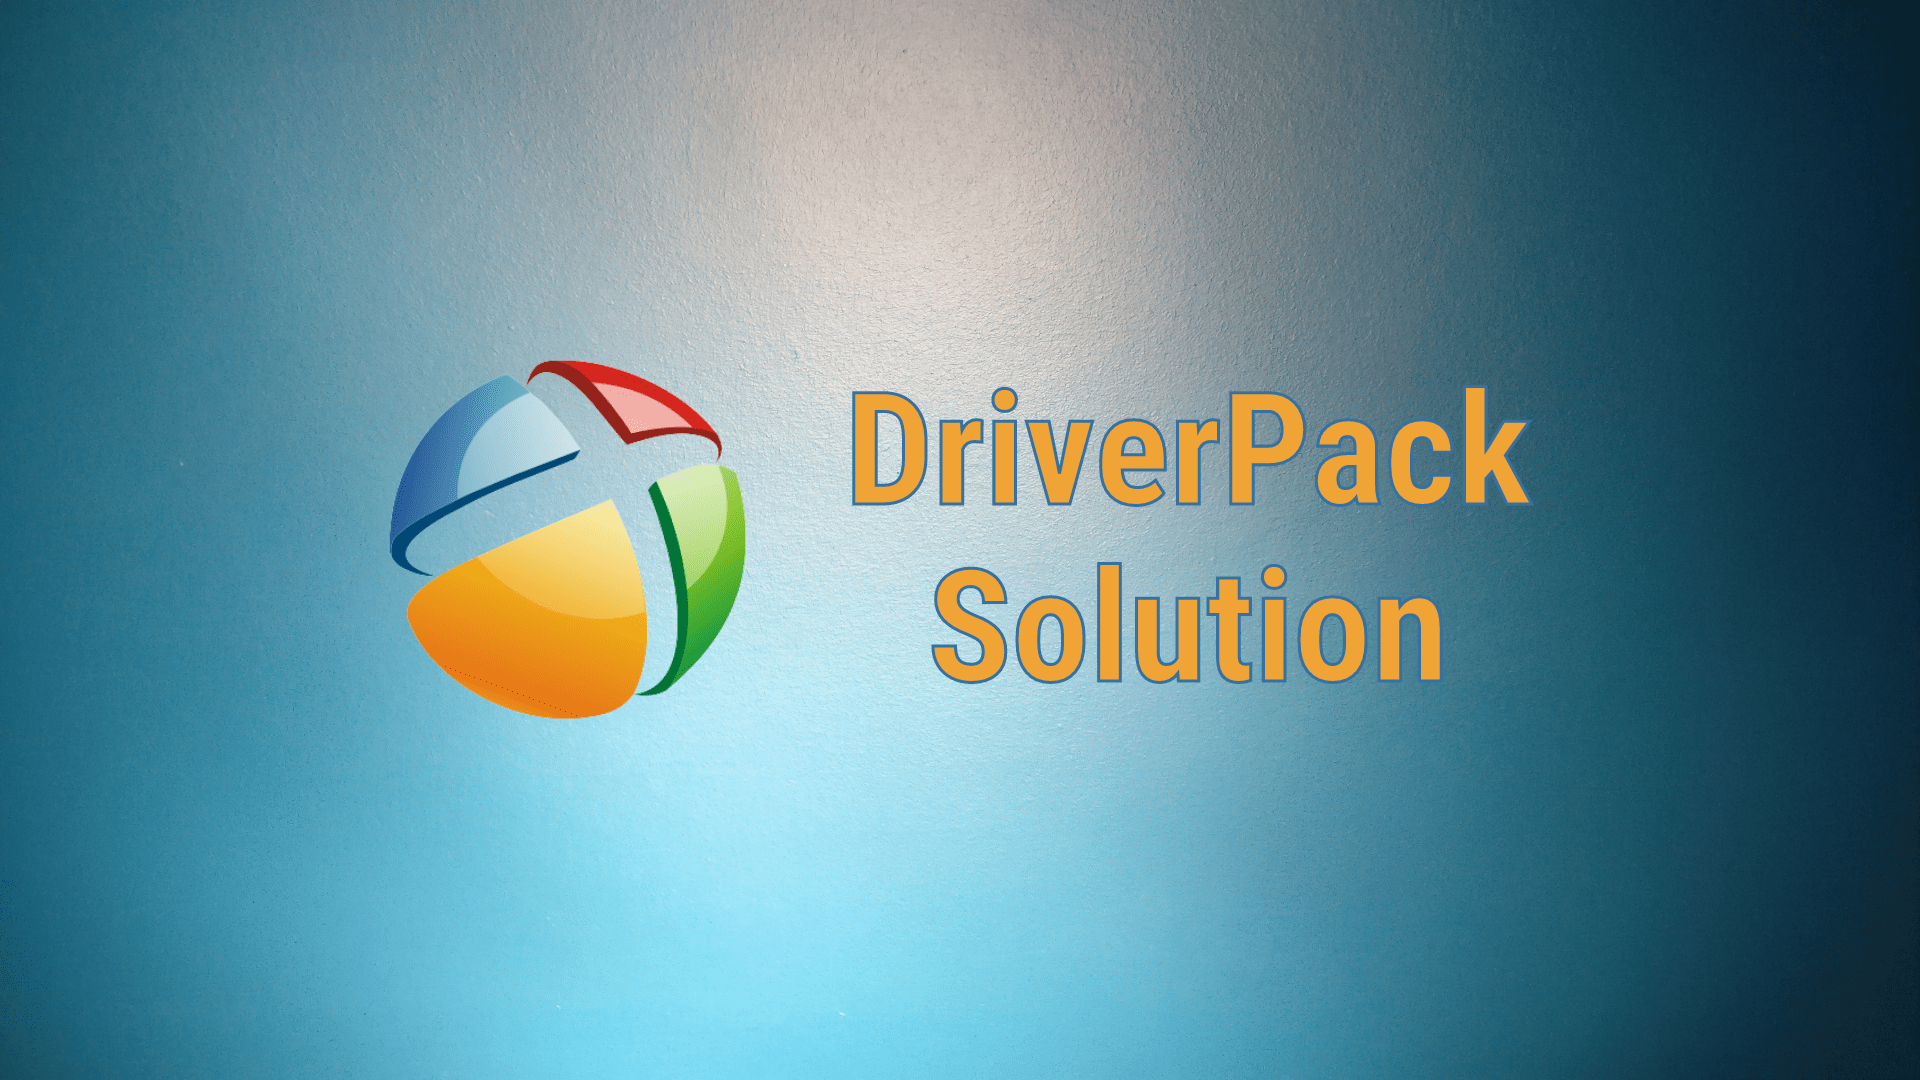 pack solution 13.0.377